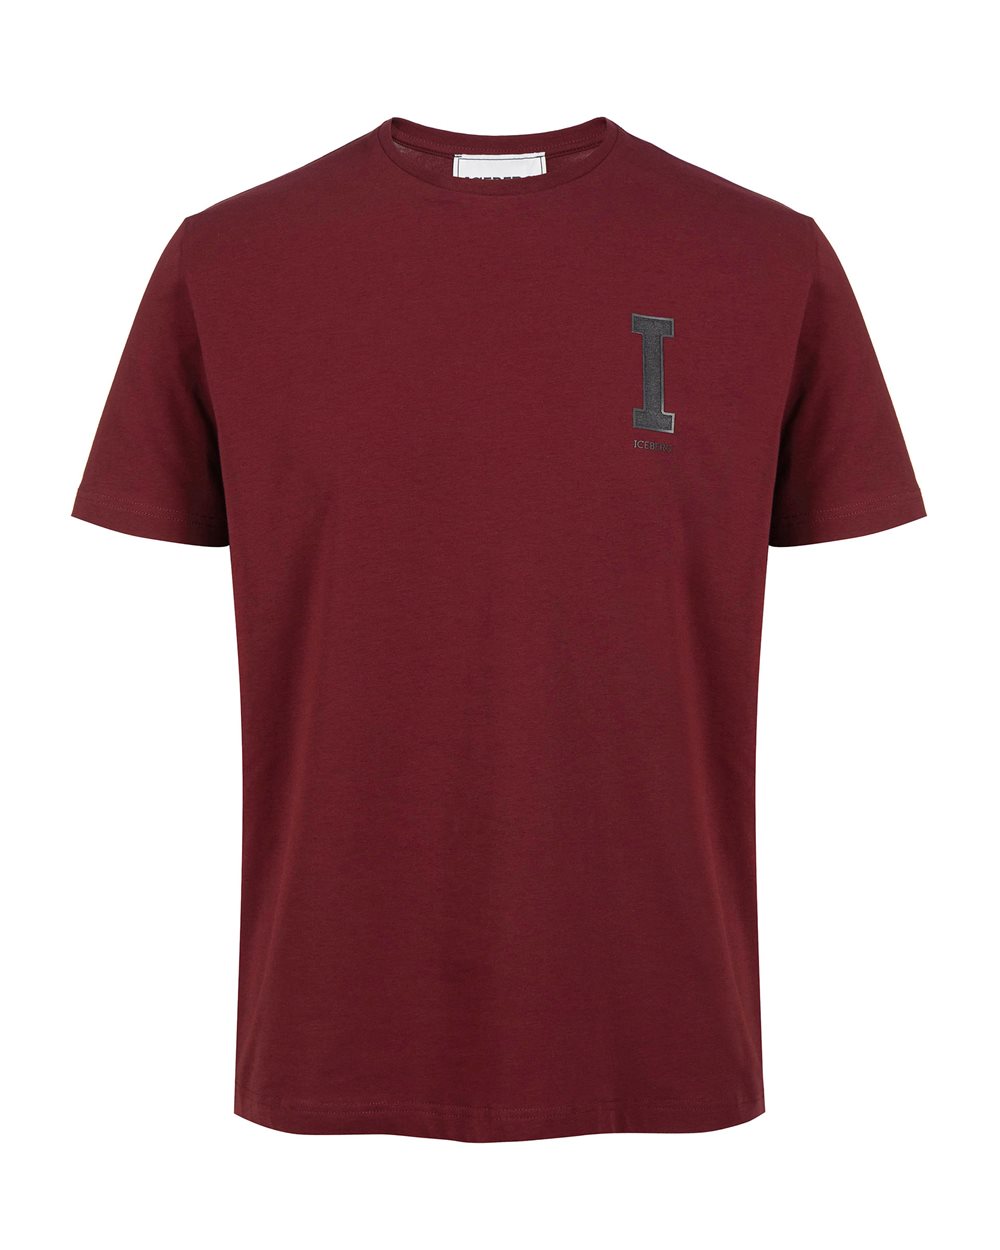 Bordeaux T-shirt with studded logo - T-SHIRT AND POLO | Iceberg - Official Website